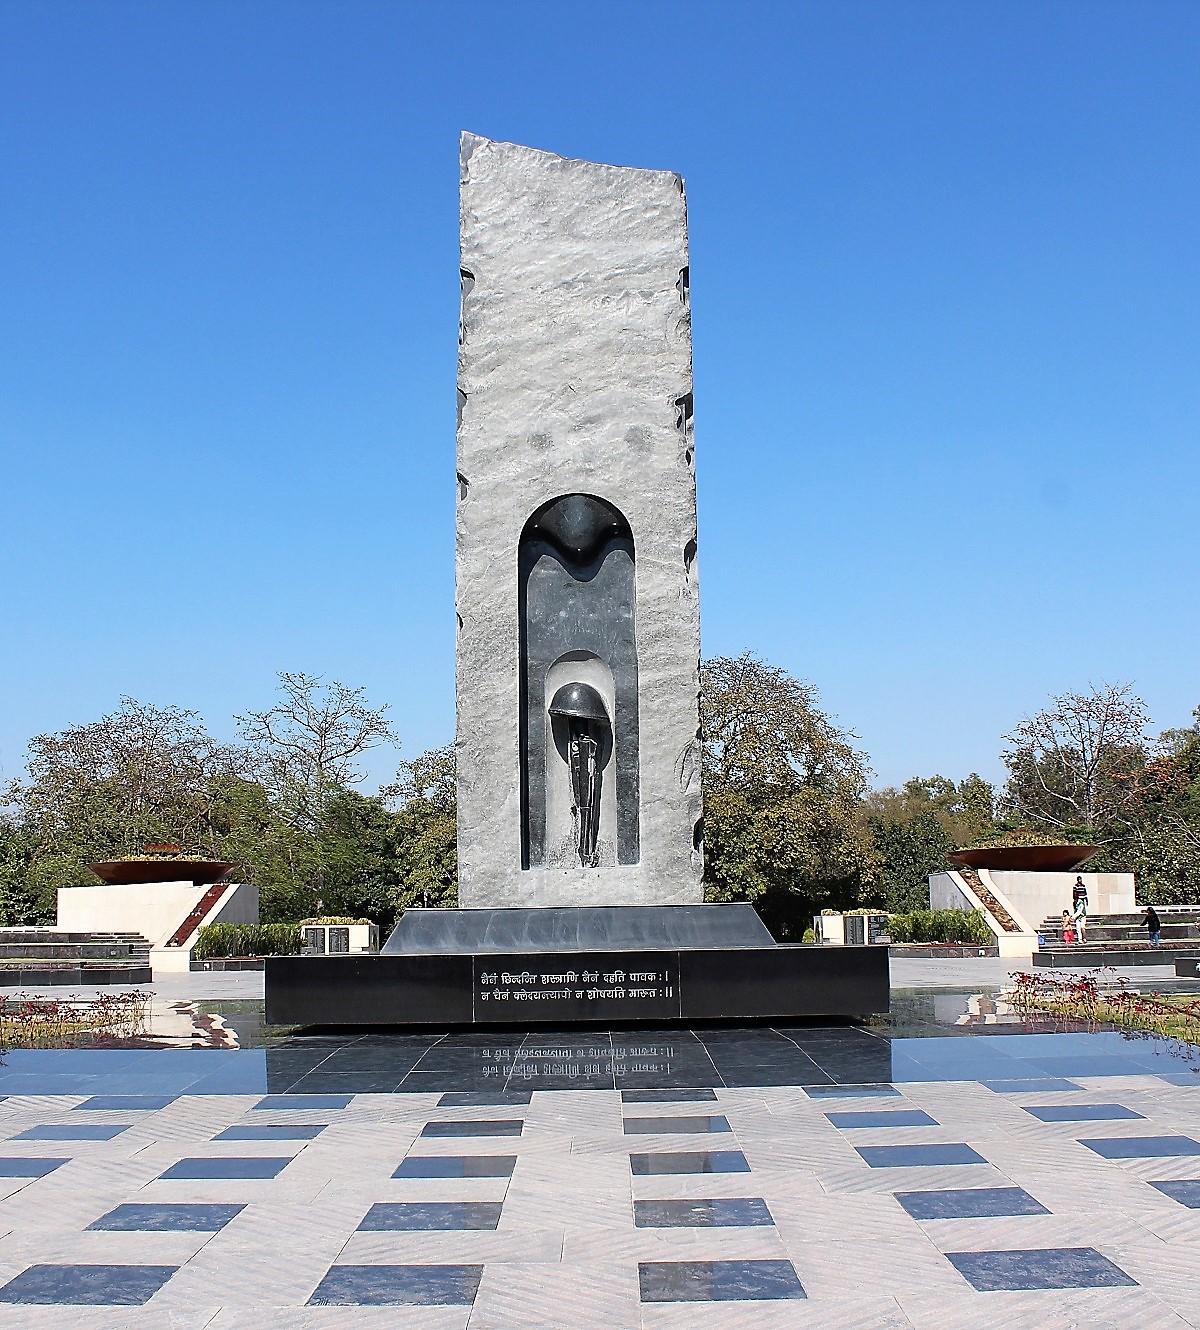 National Police Memorial At New Delhi Is A Blend Of Art, Architecture